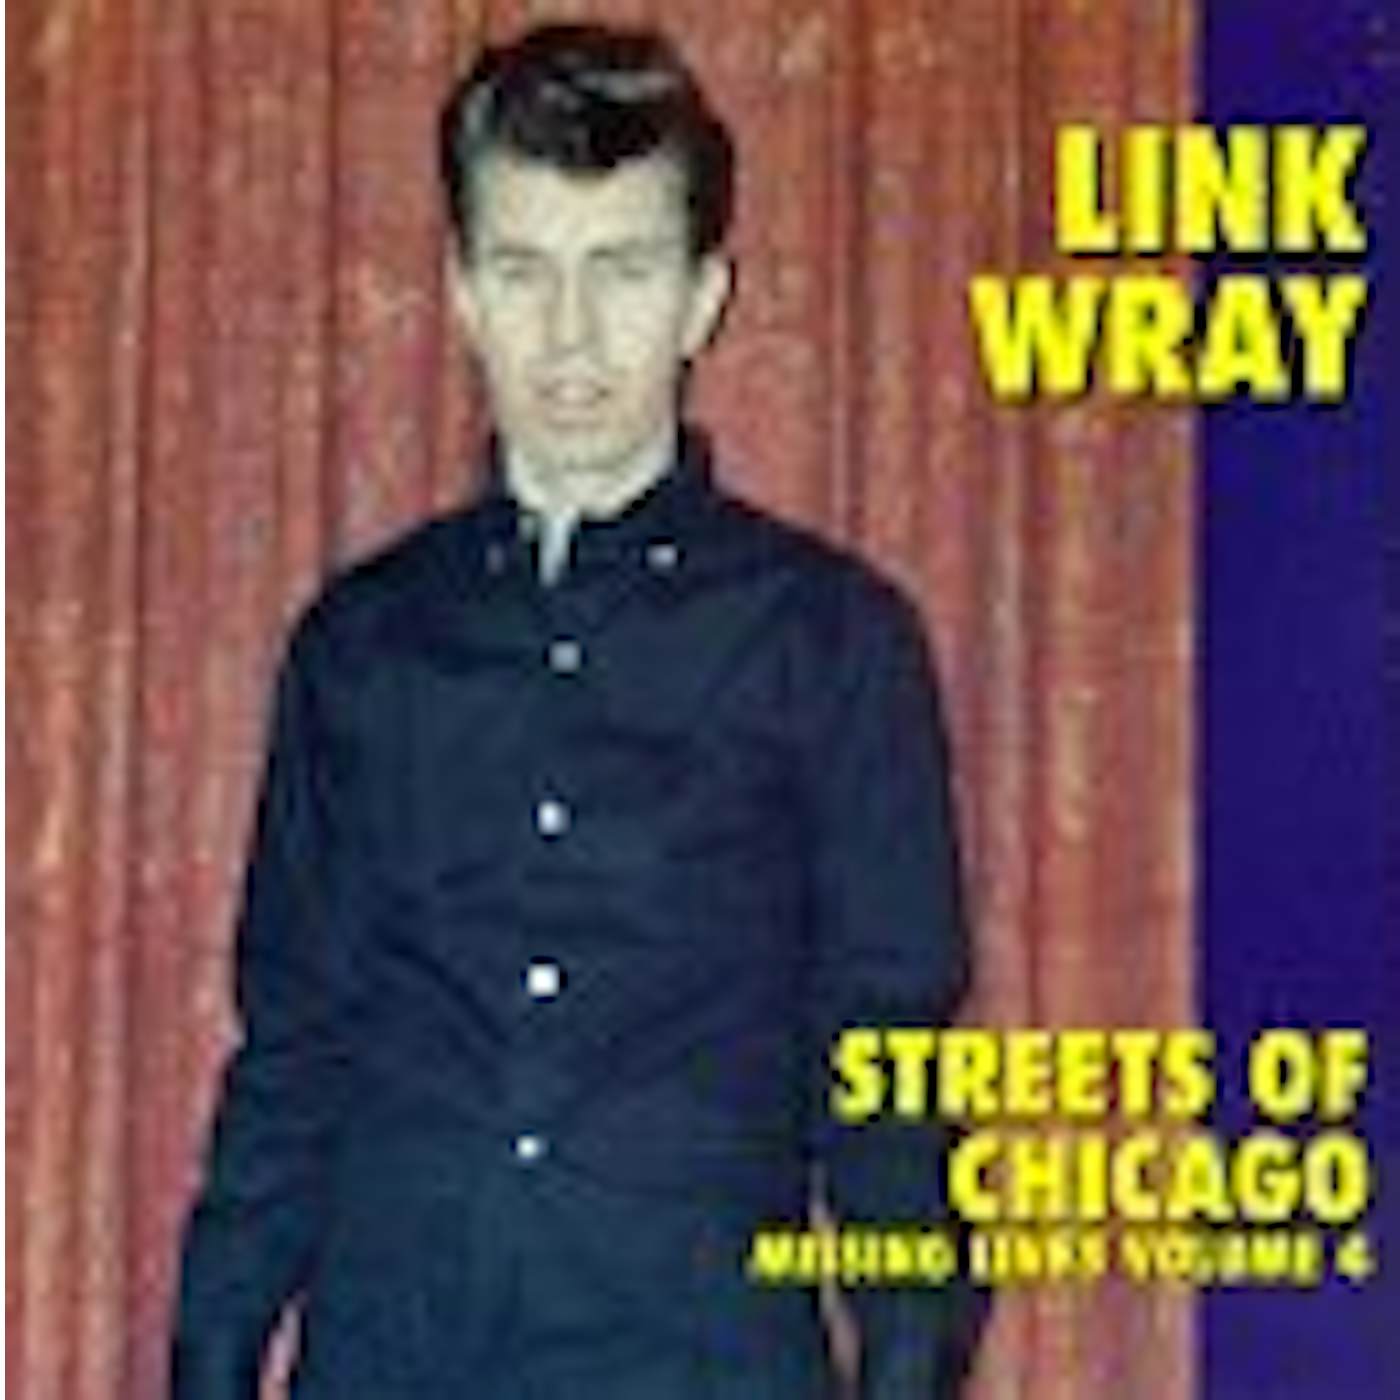 Link Wray STREETS OF CHICAGO: MISSING LINKS 4 Vinyl Record